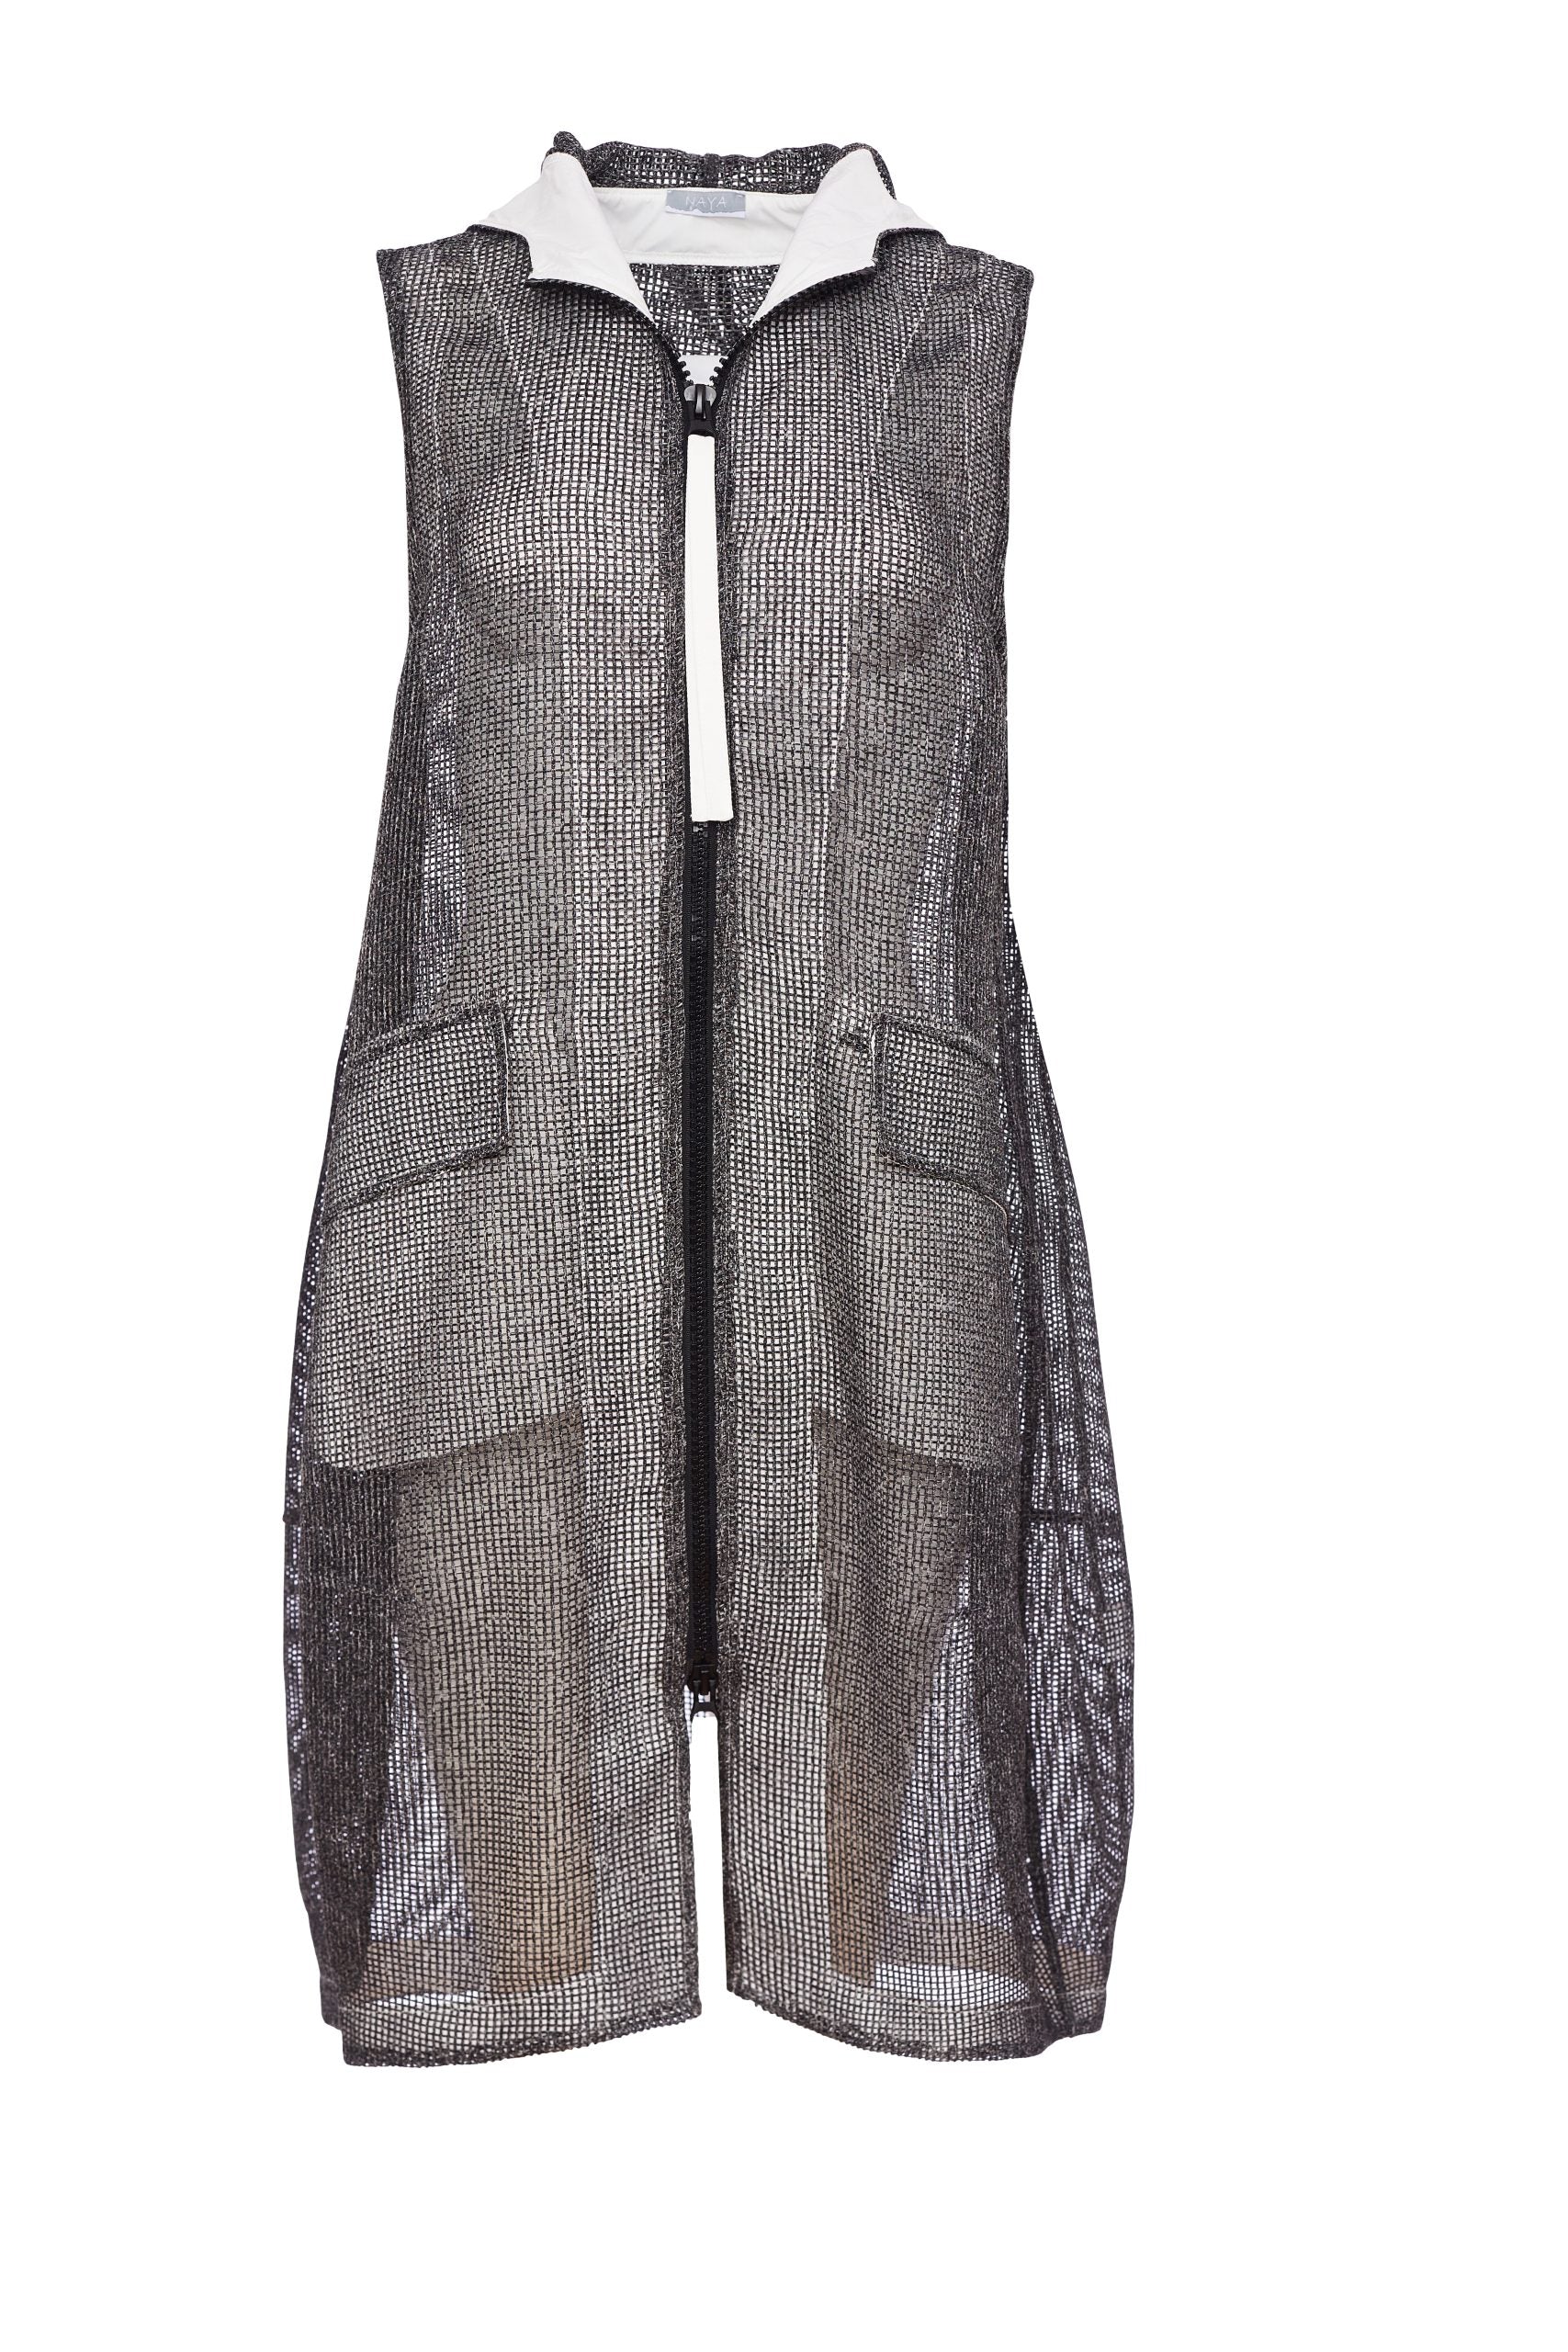 Loose Weave Waistcoat in Anthracite